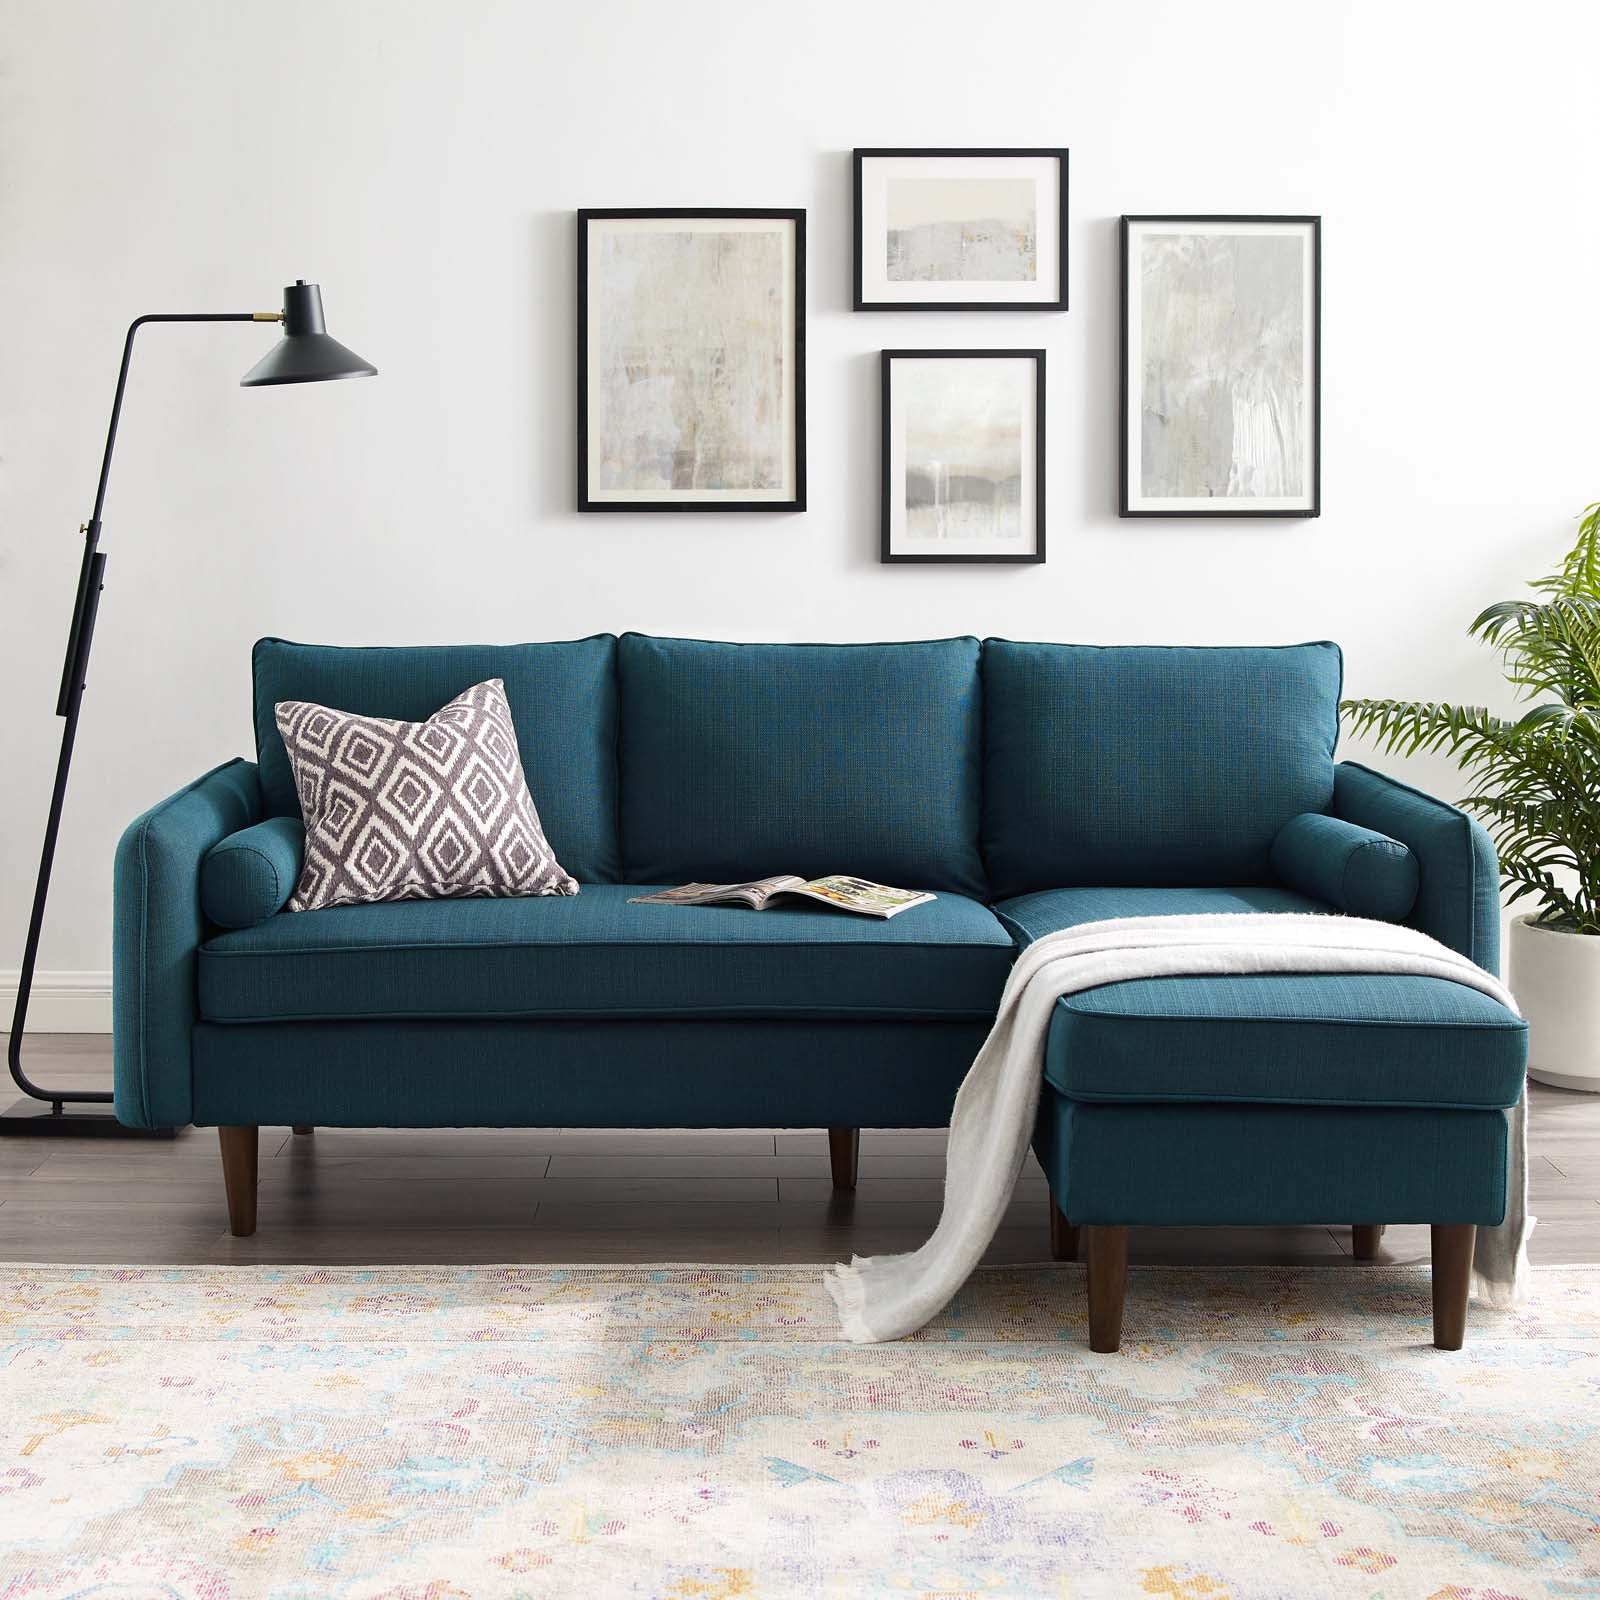 Revive Upholstered Convertible Sectional Sofa